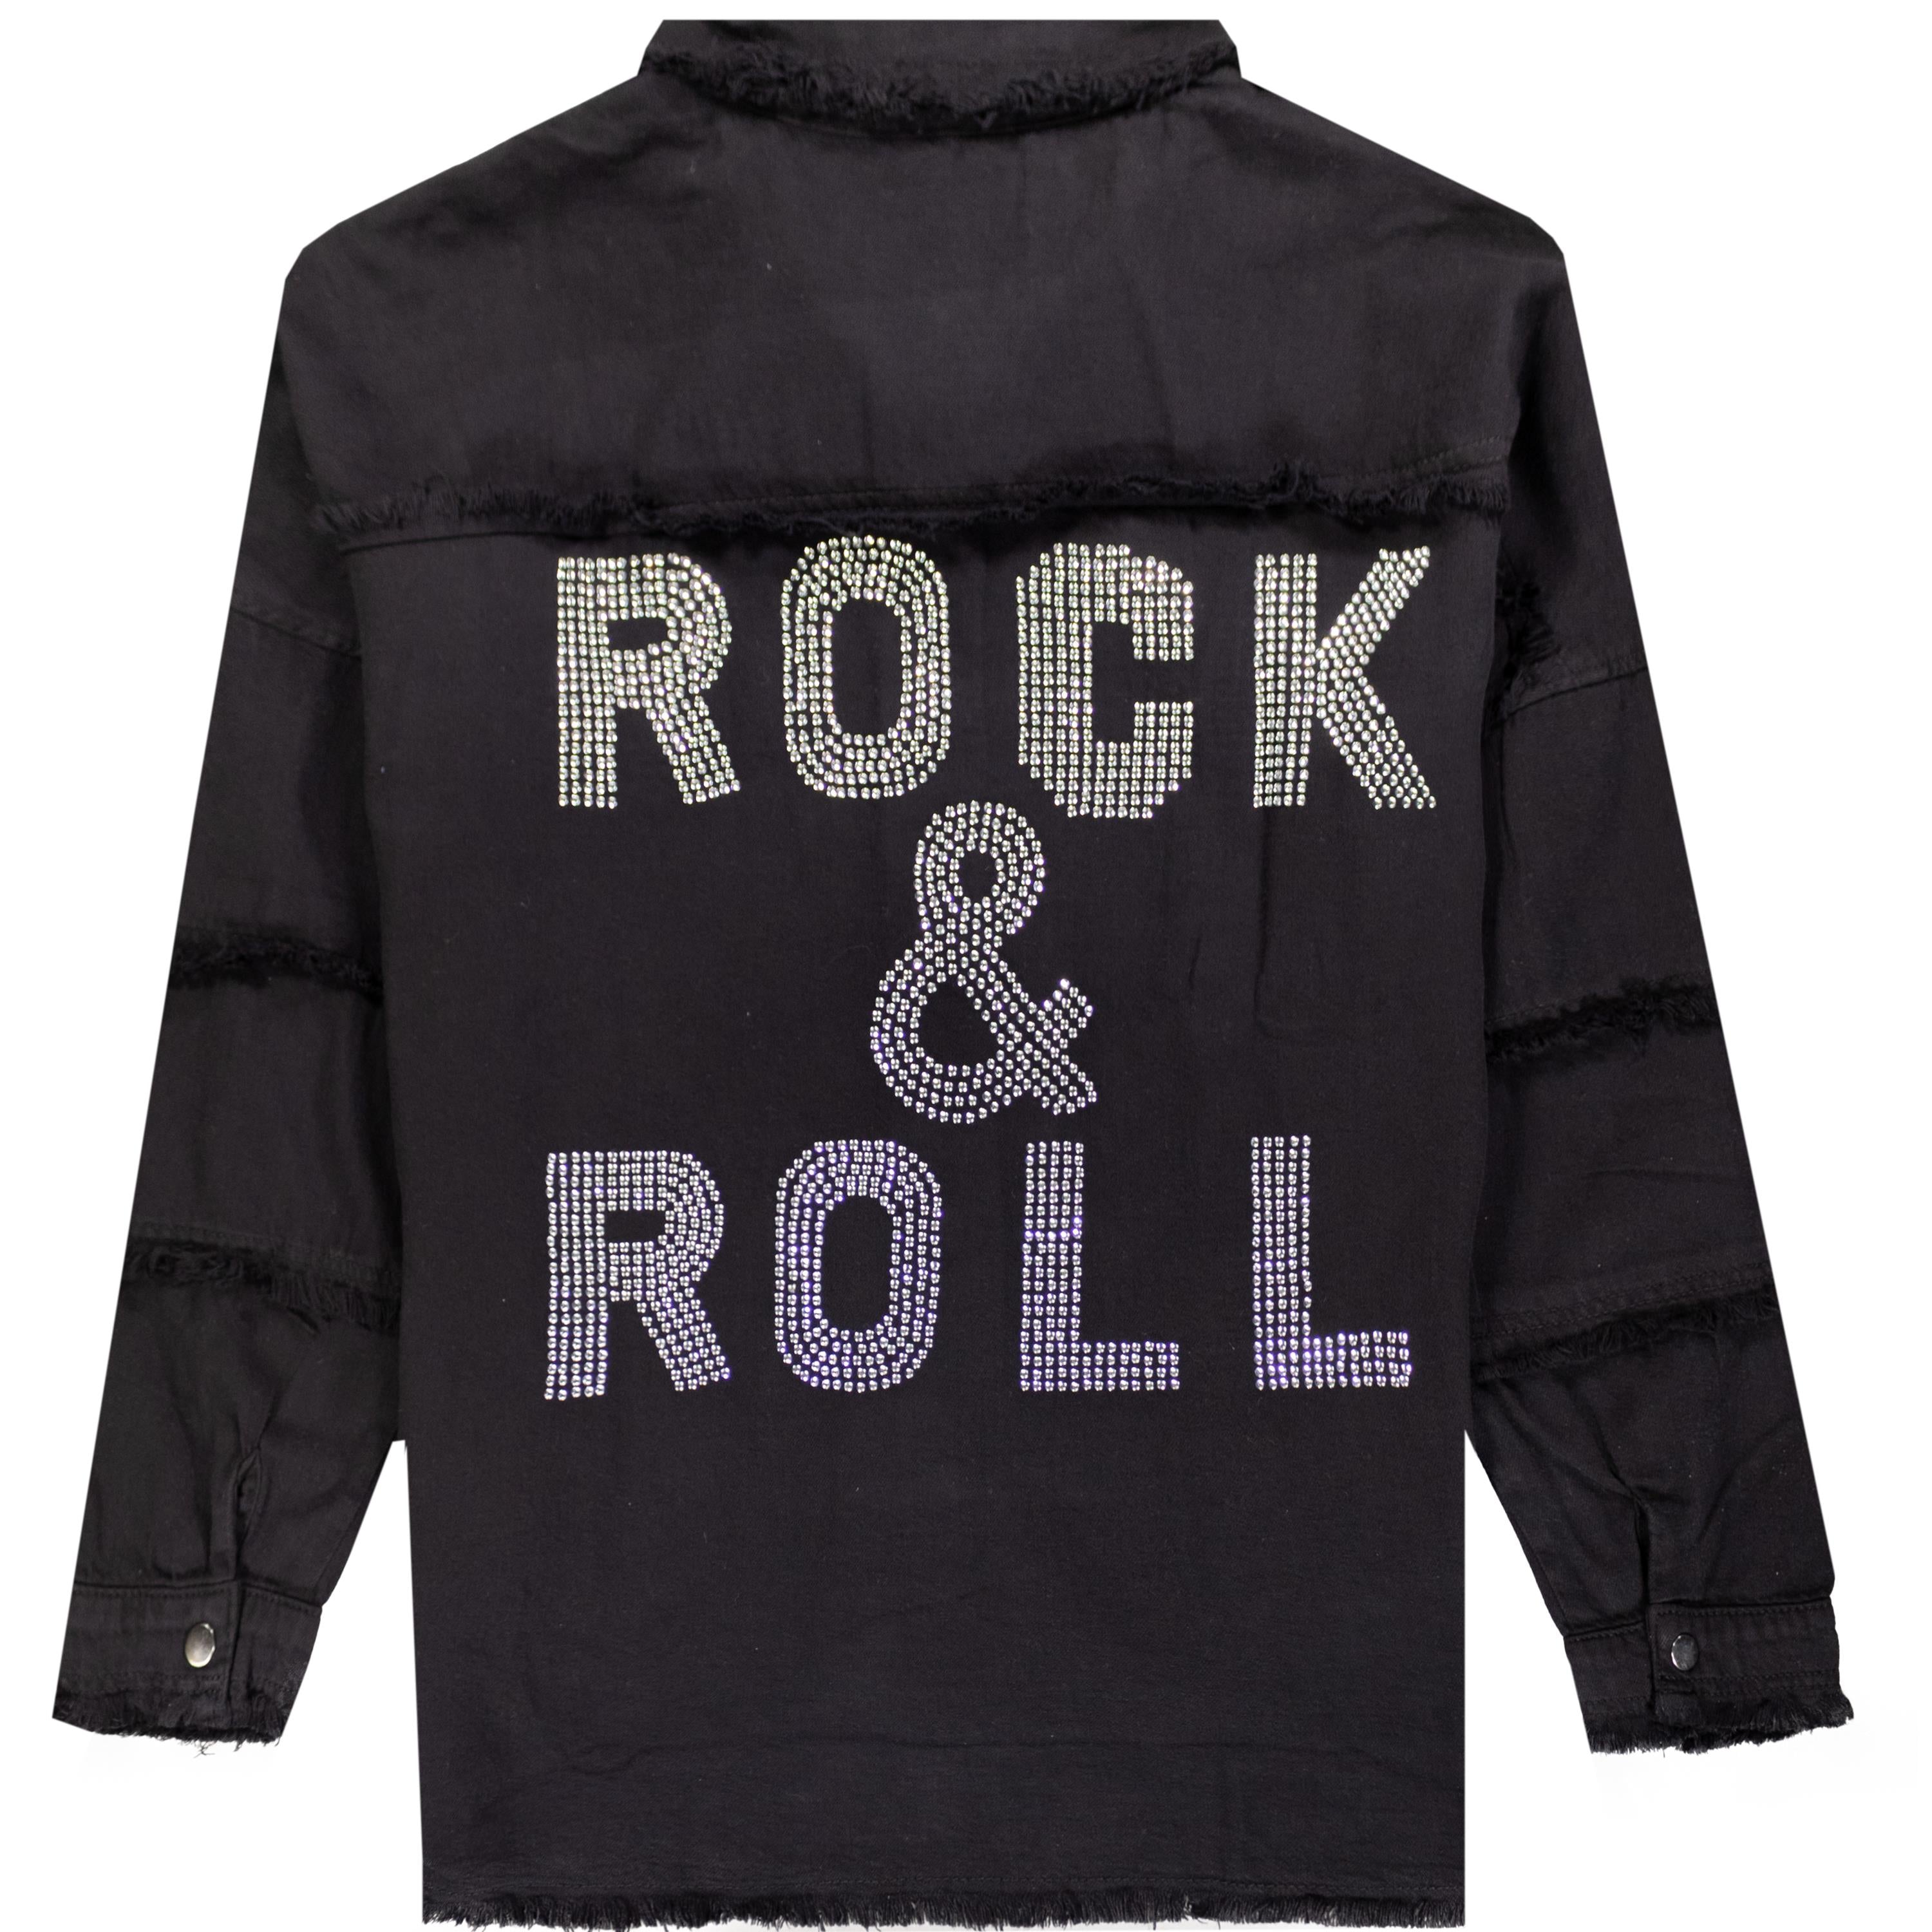 & Jacket Down Rock Roll Button Bling